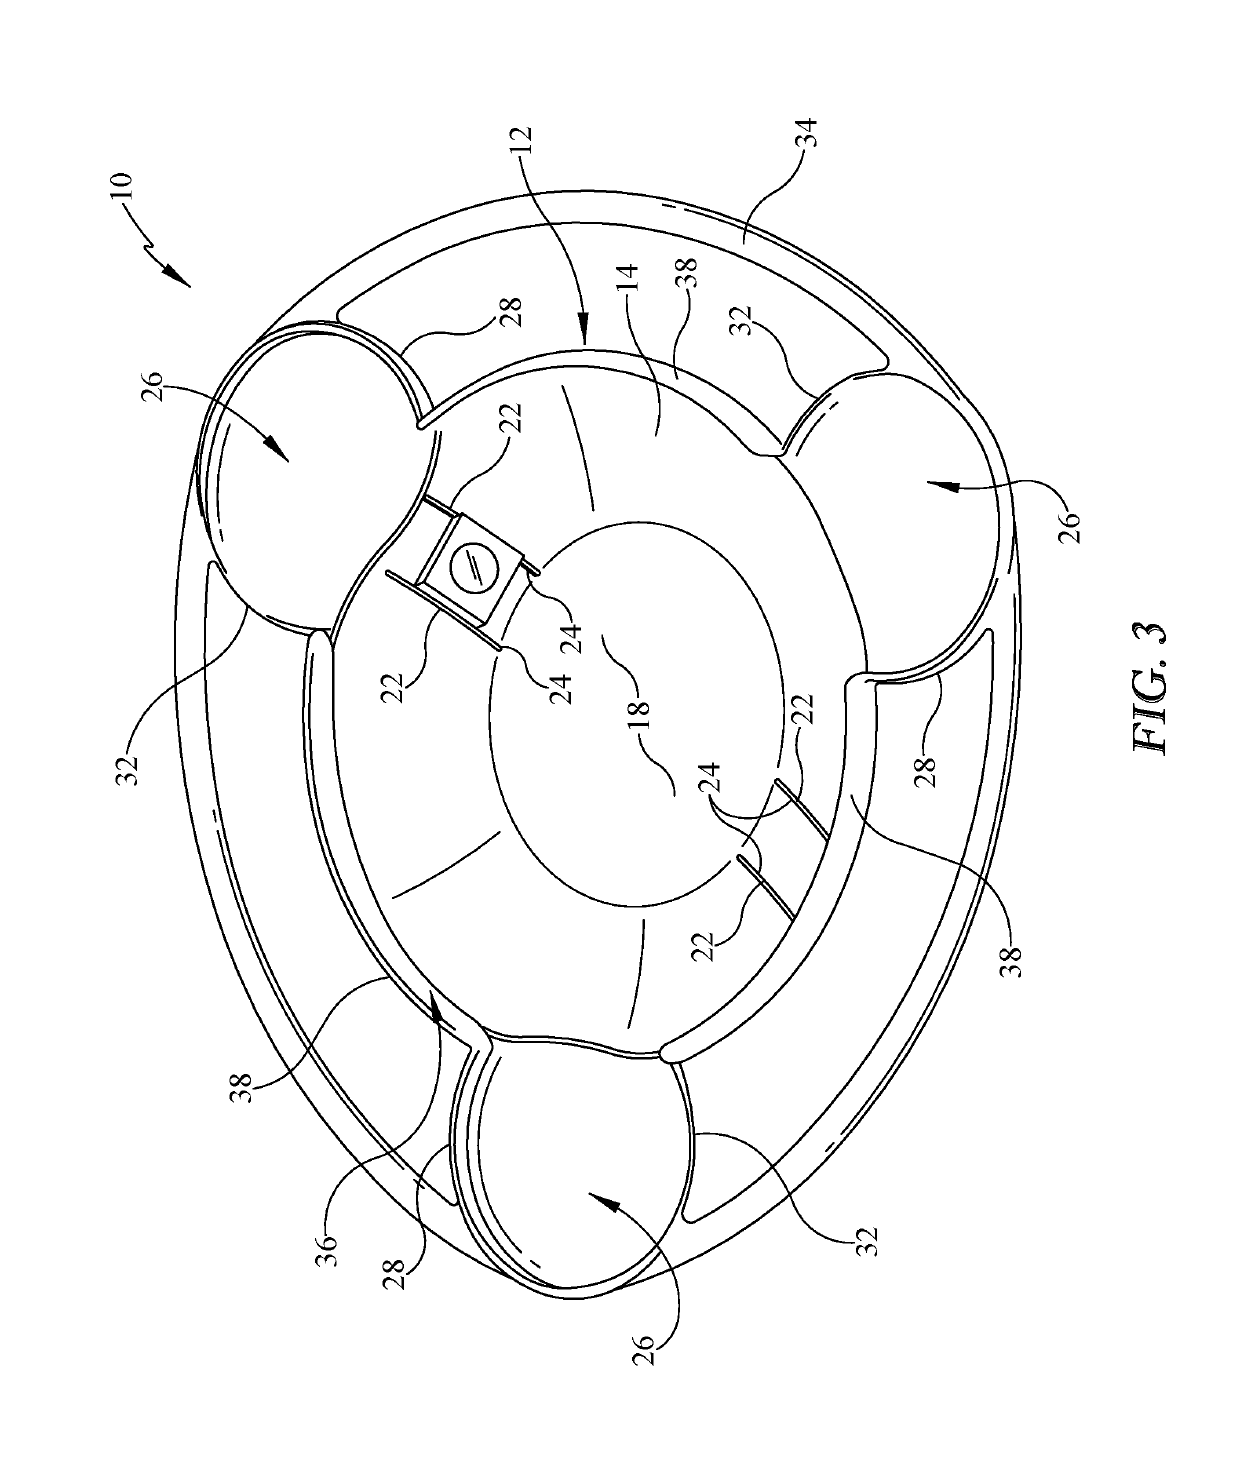 Flying disk with airfoils